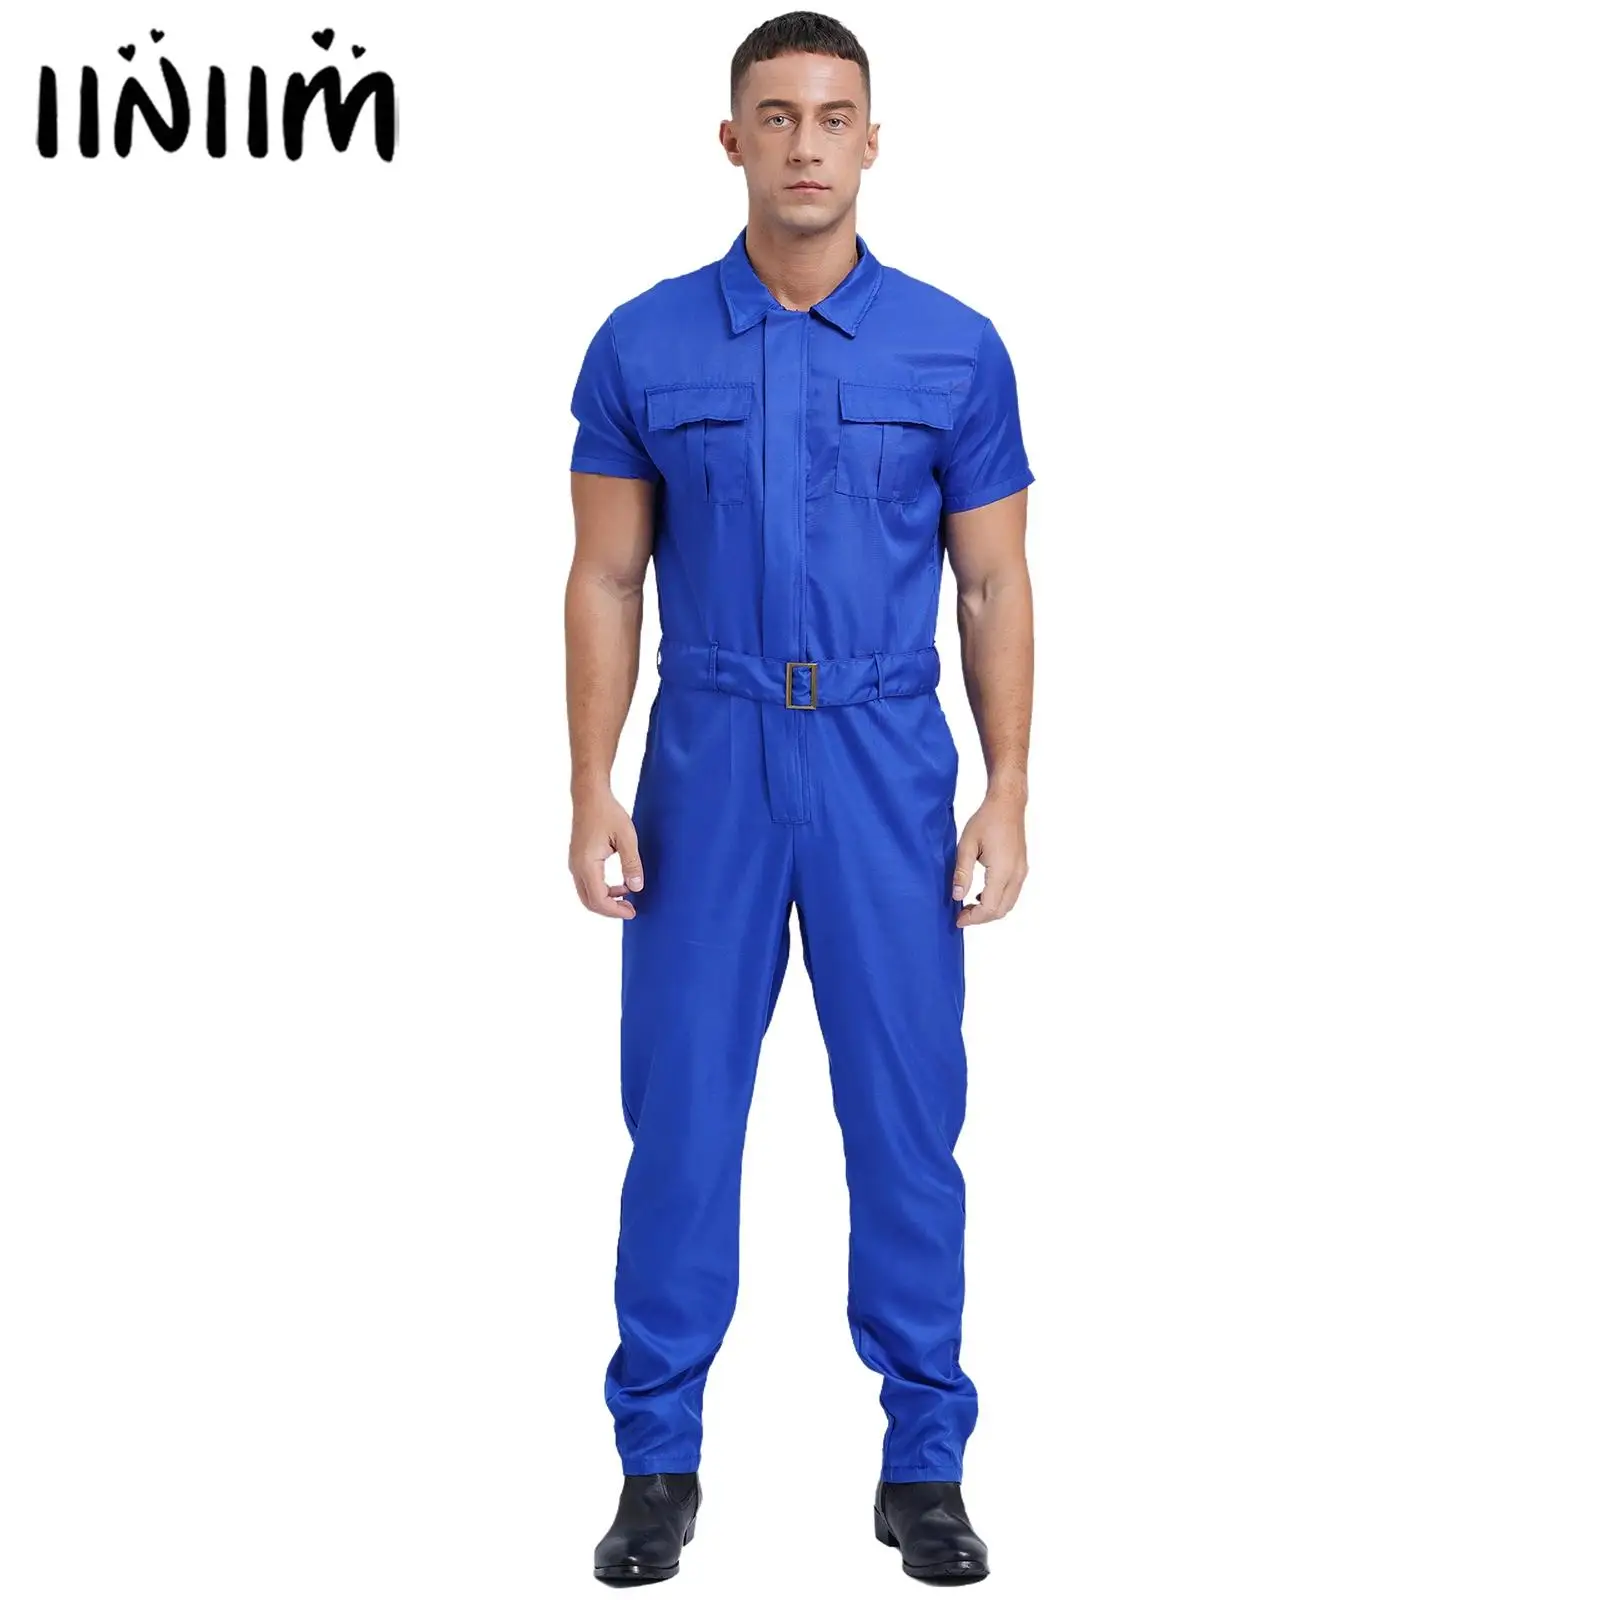 

Mens Summer Work Wear Resistant Coverall with Belt Short Sleeve Front Zipper Multiple Pockets Overalls Jumpsuit Dungarees